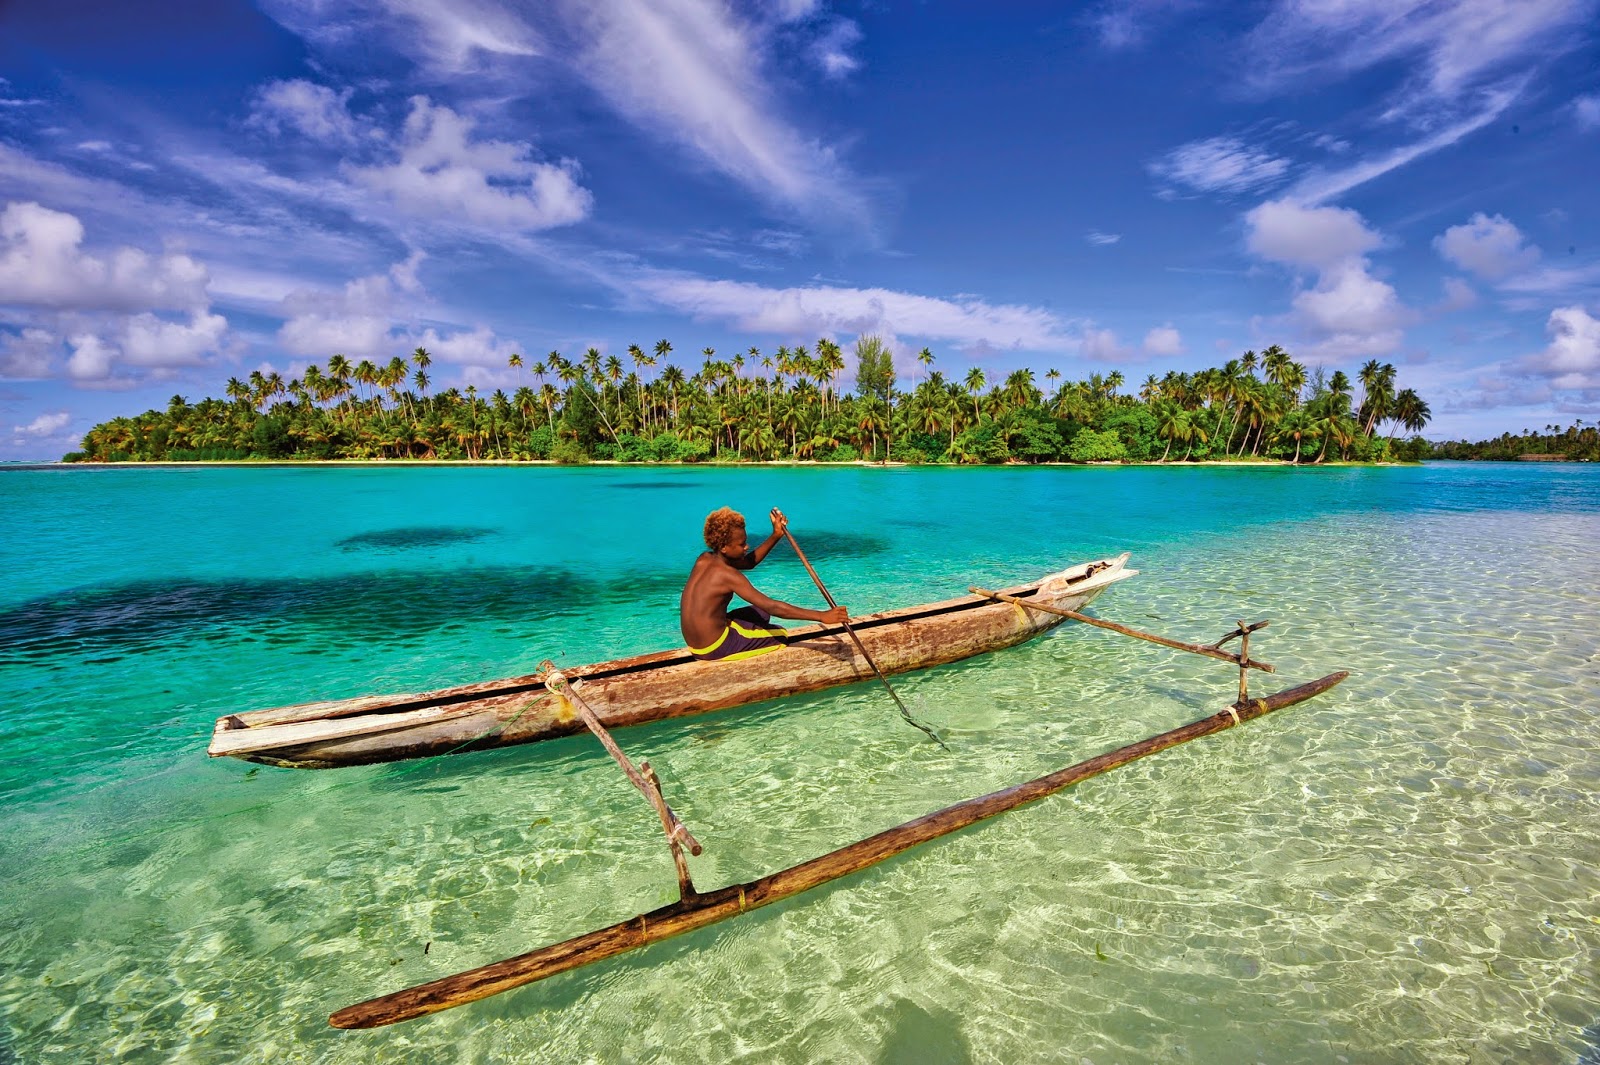 A boy canoeing in crystal clear water - Papua New Guinea